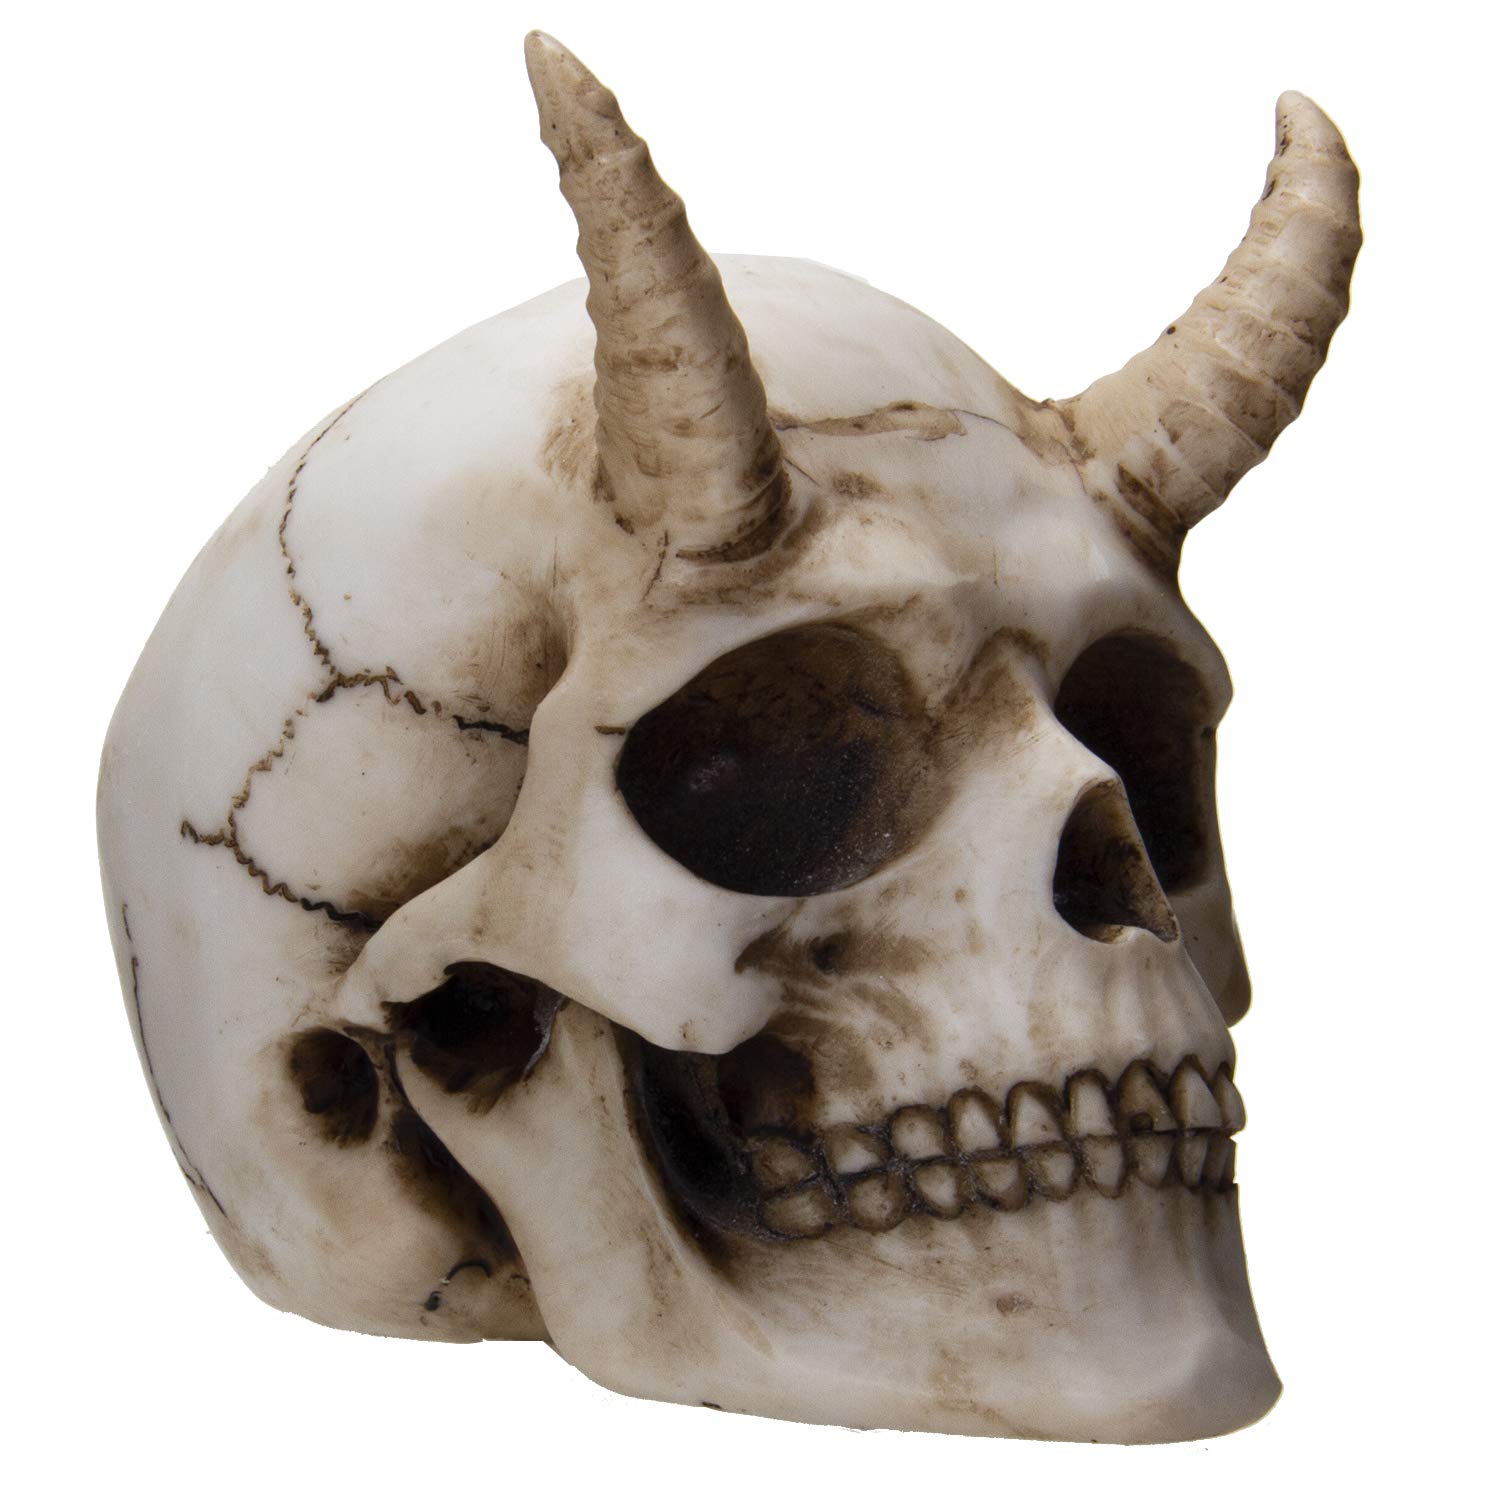 Horned Skeleton Unearthed: Ancient Giant with Horns Found in East Africa - T-News